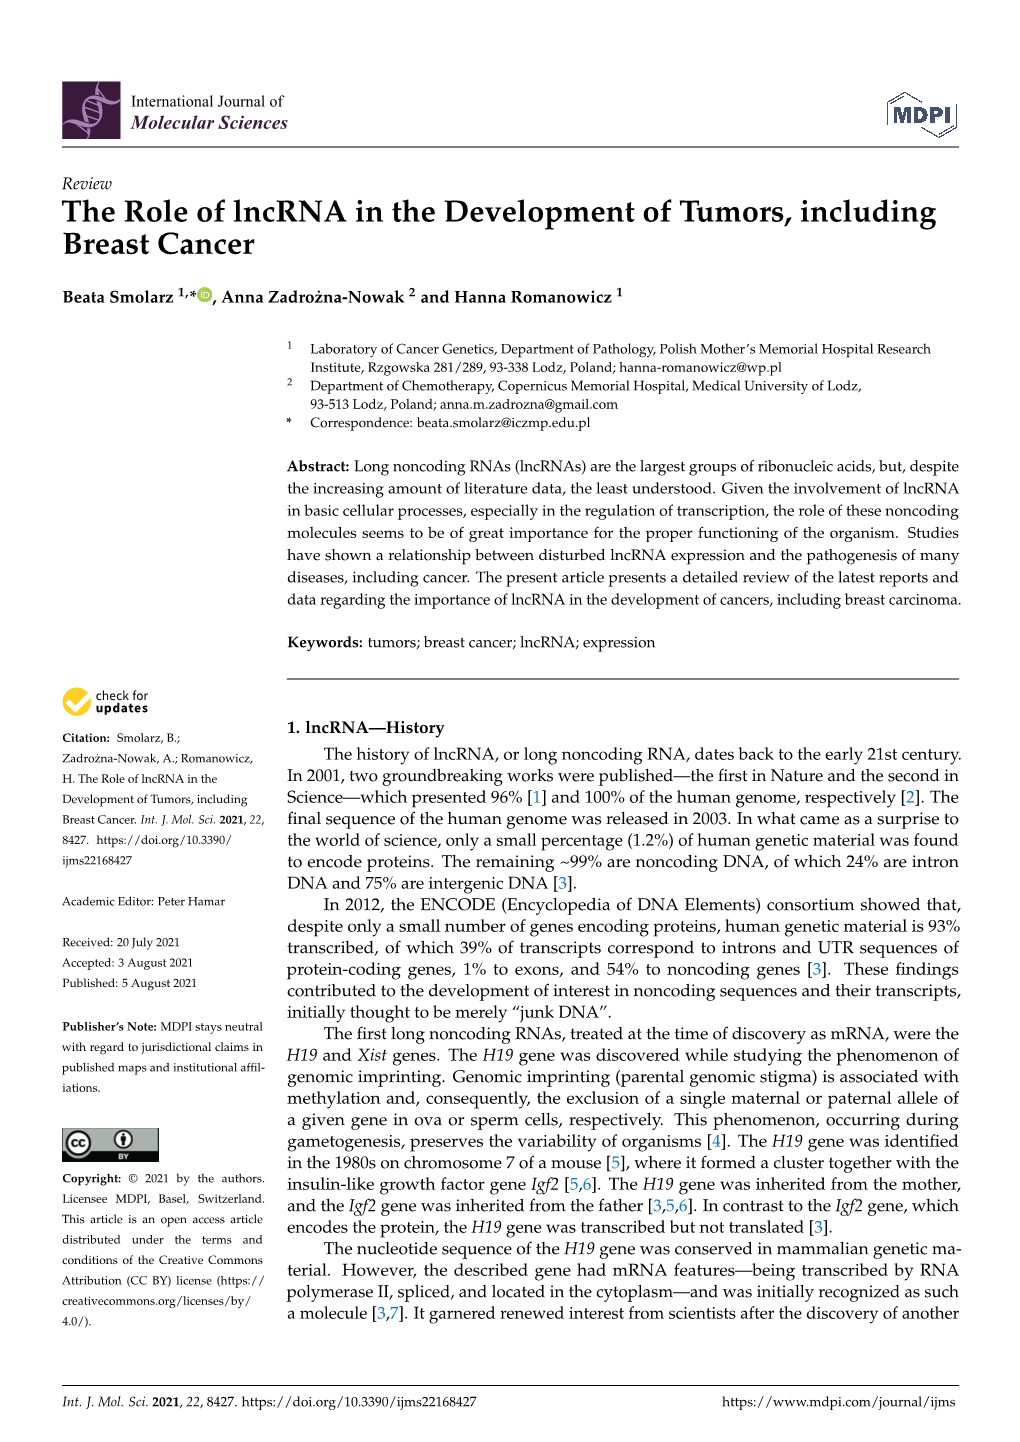 The Role of Lncrna in the Development of Tumors, Including Breast Cancer